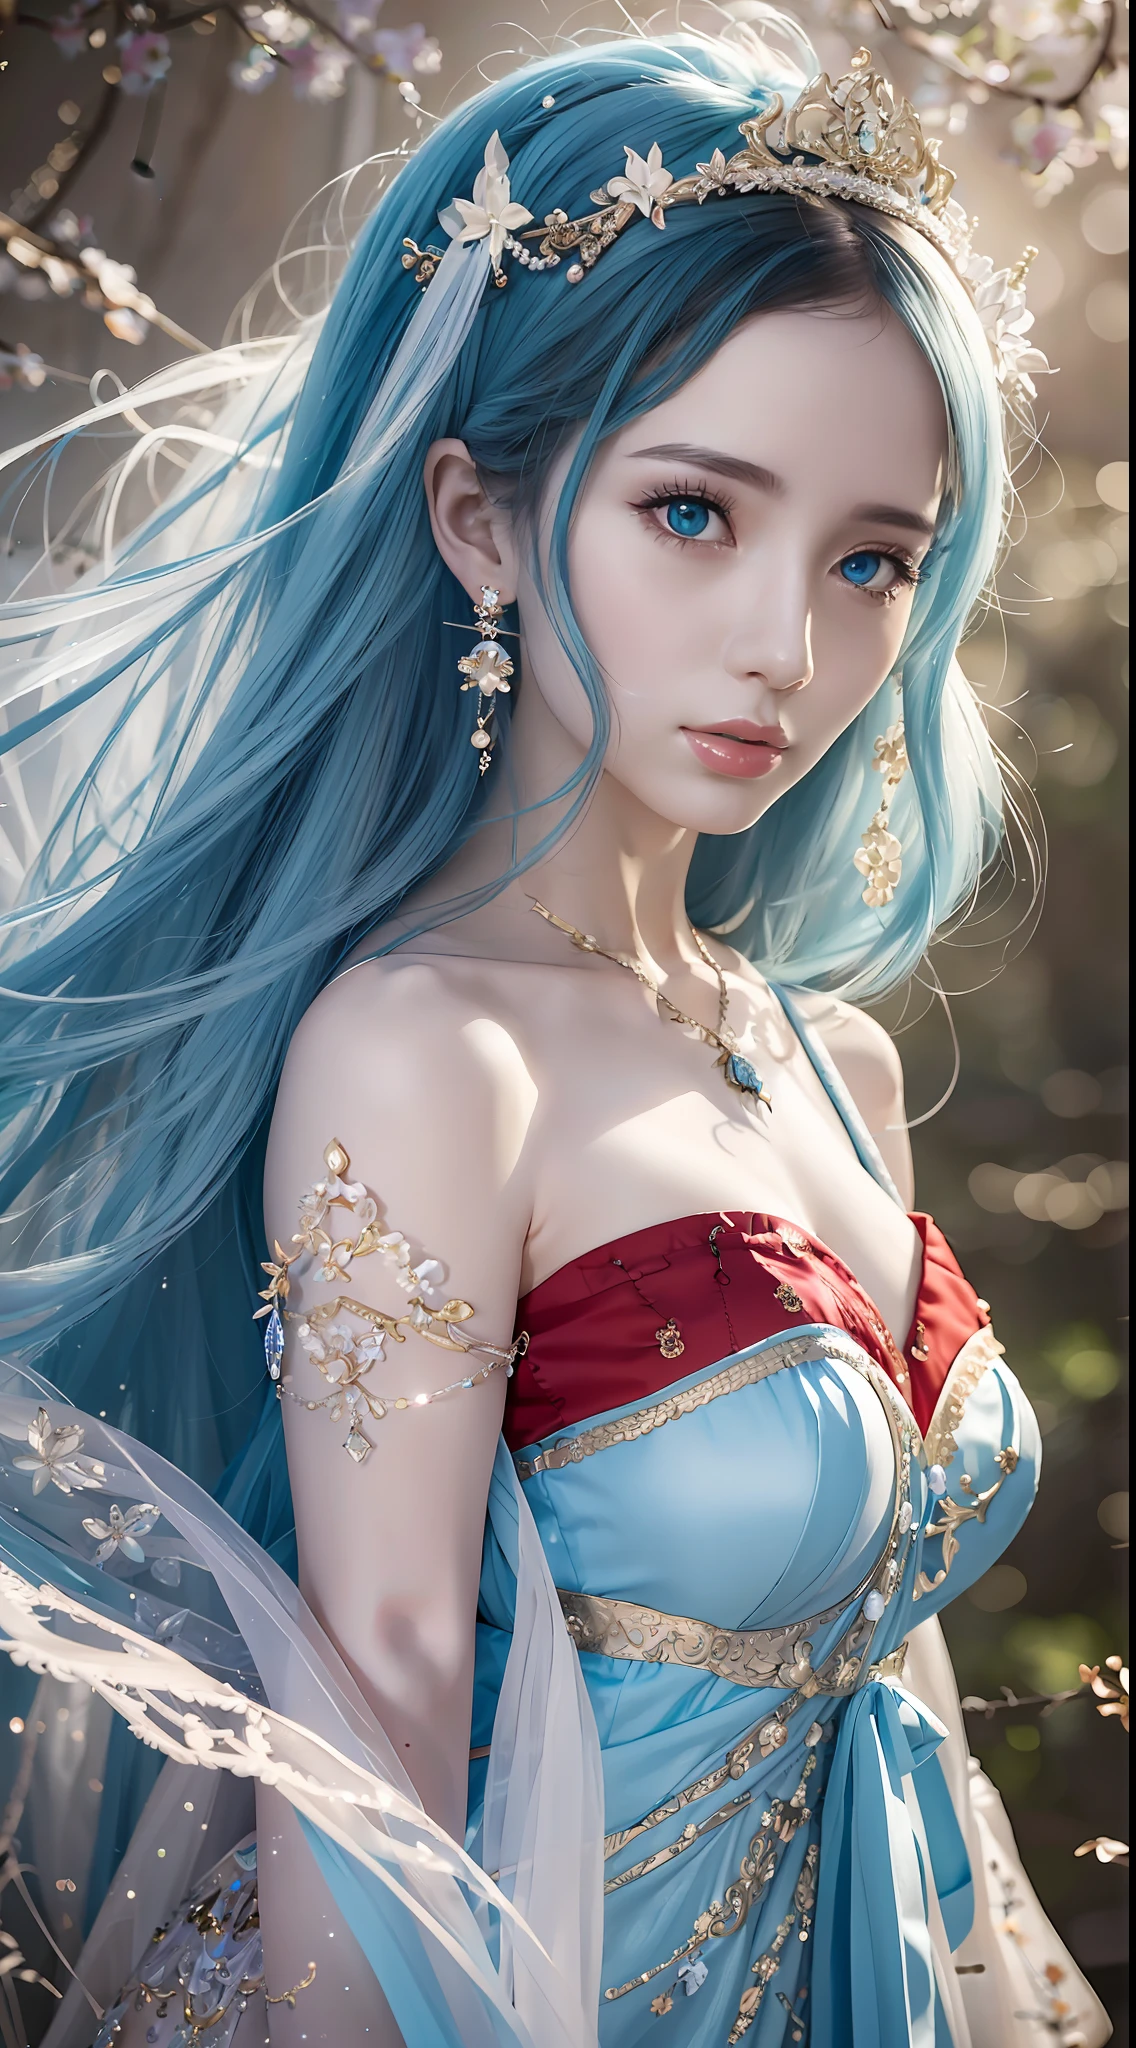 (8K, Best Quality, Masterpiece: 1, 2), (Realistic, Photo Realistic: 1, 37), Top Quality, Masterpiece, There Is a Woman in Red Dress Posing for Photos, Moon-Themed Costume, Astral Witch Costume, Fantasy Costume, Live Action Girl Role Play, Beautiful Celestial Mage, Inspired by Cold Plum, Bandeau Dress, Pop on CGSTATION, Celestial Goddess, April Rendering, Light Blue, Fantastic Medium Portrait Top Light, Light Blue Skin, Amouranth, Fantasy dresses